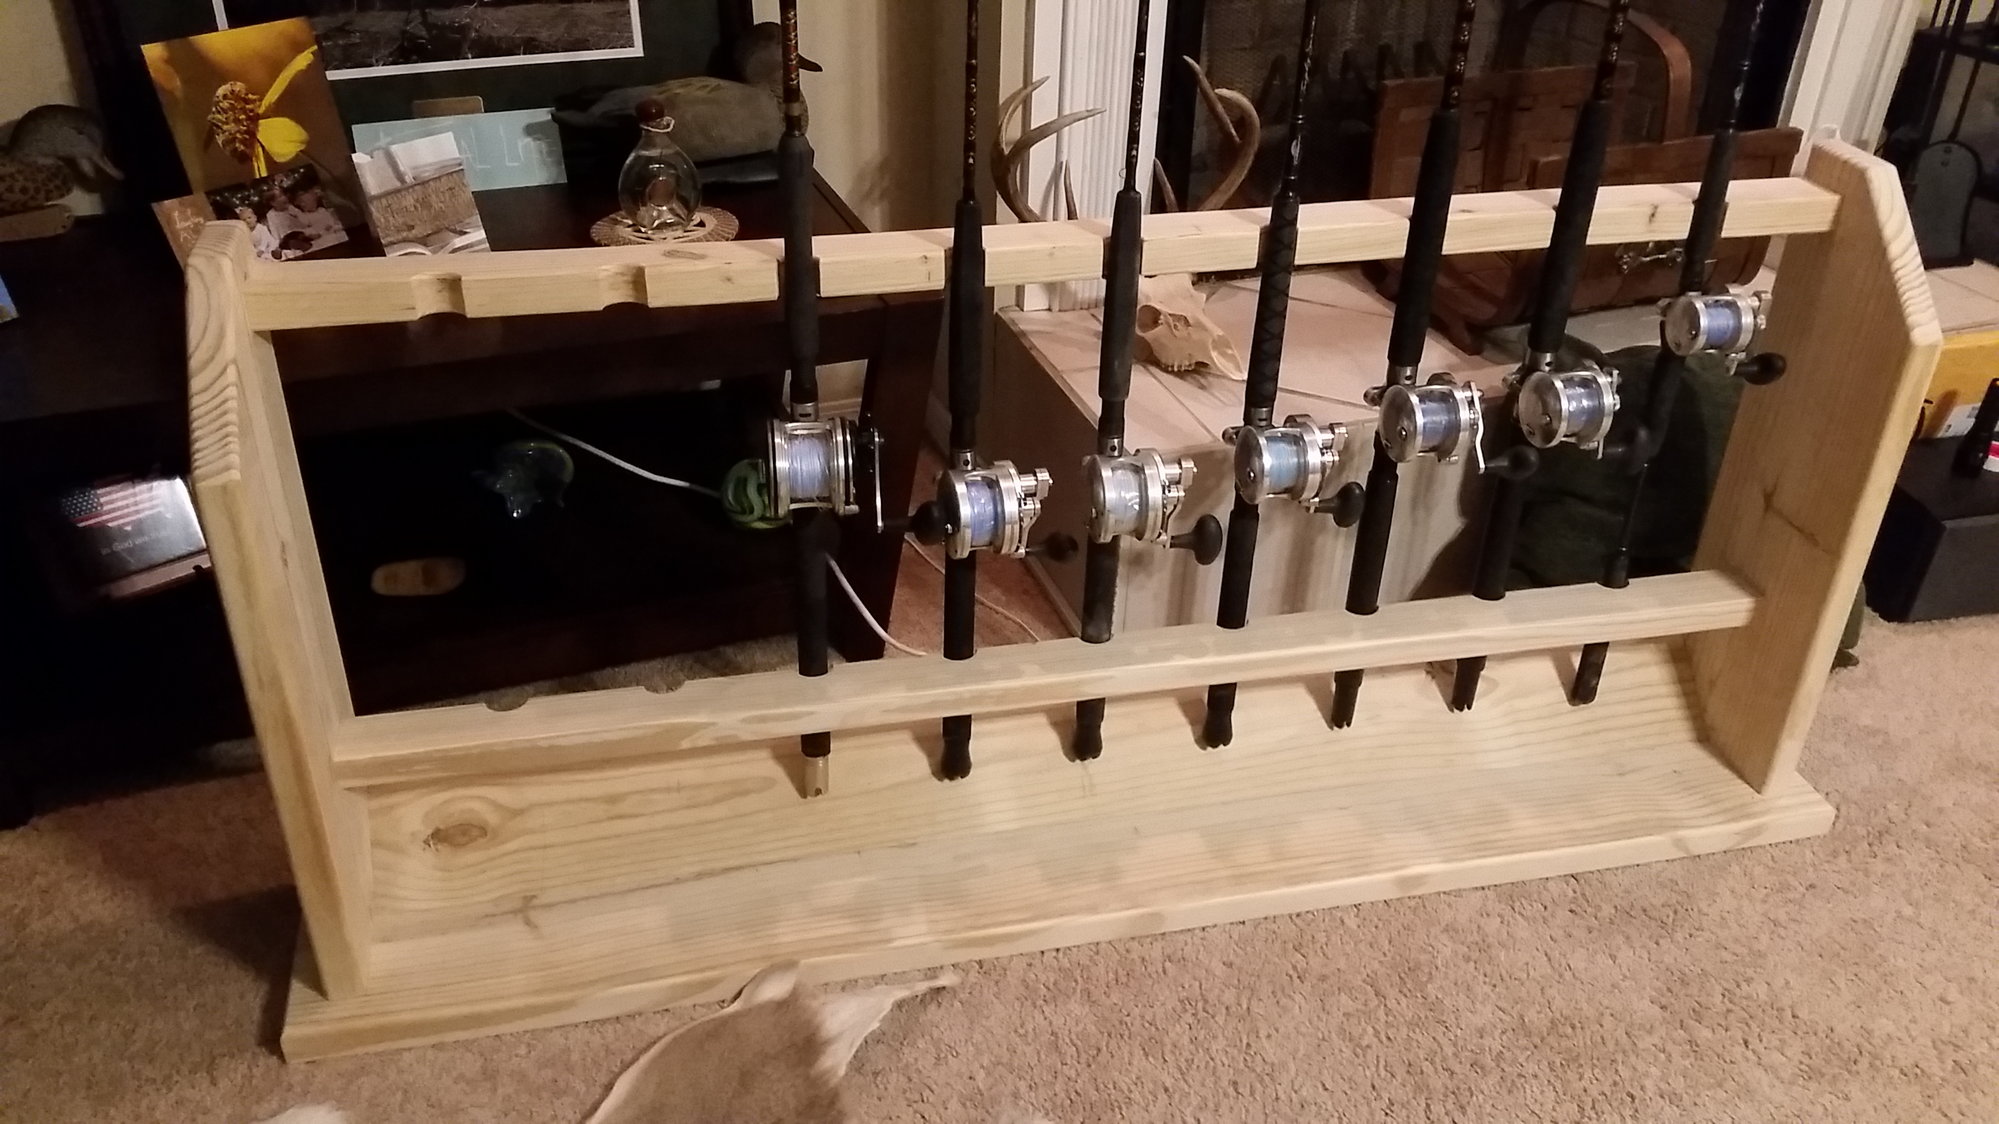 Wooden Rod Rack Ideas - Page 2 - The Hull Truth - Boating and Fishing  Forum